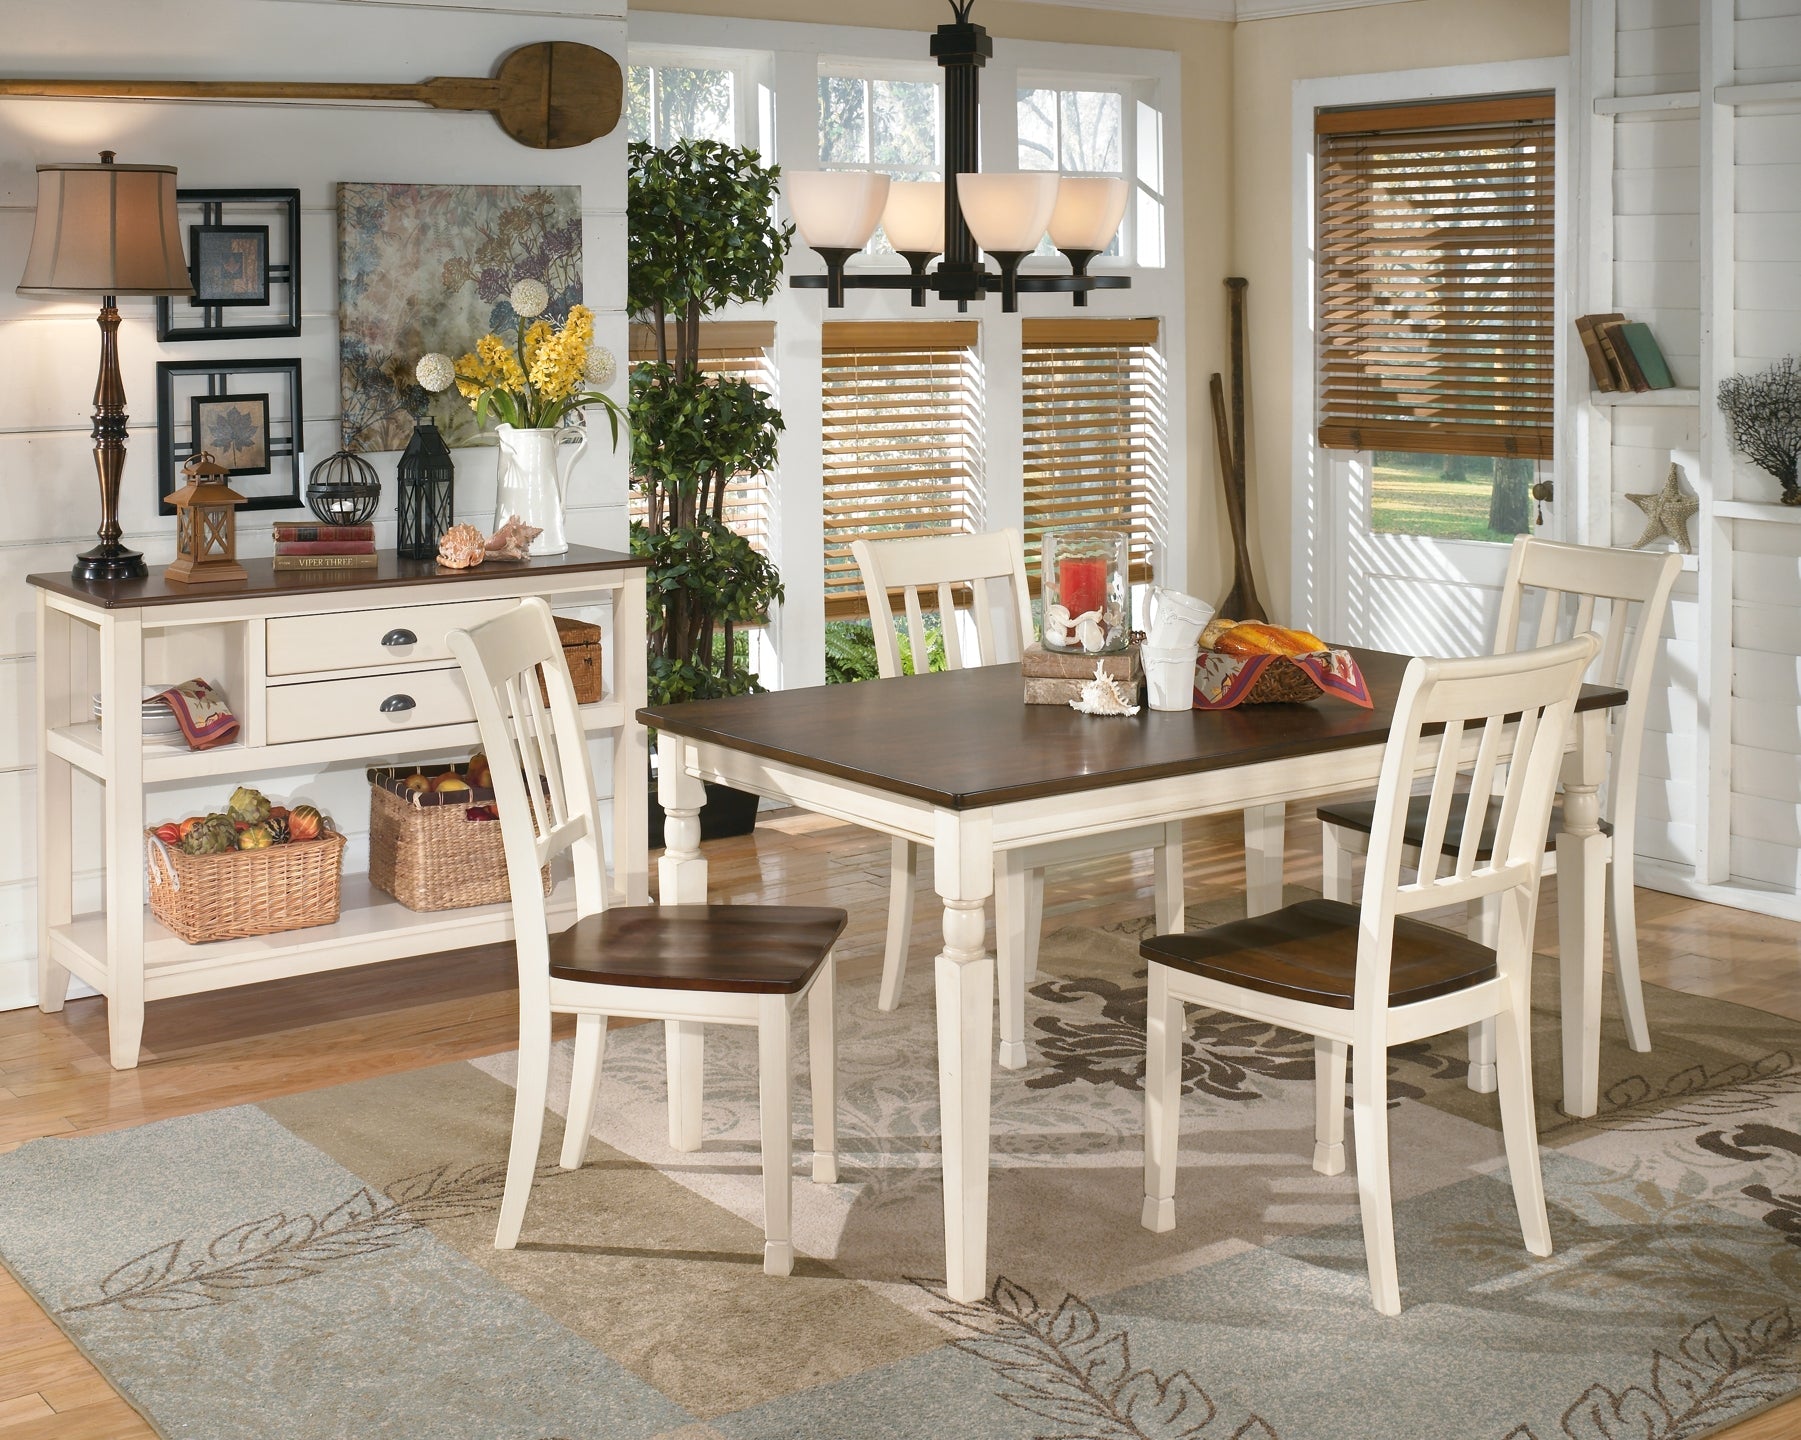 Whitesburg Dining Table and 4 Chairs with Storage at Walker Mattress and Furniture Locations in Cedar Park and Belton TX.